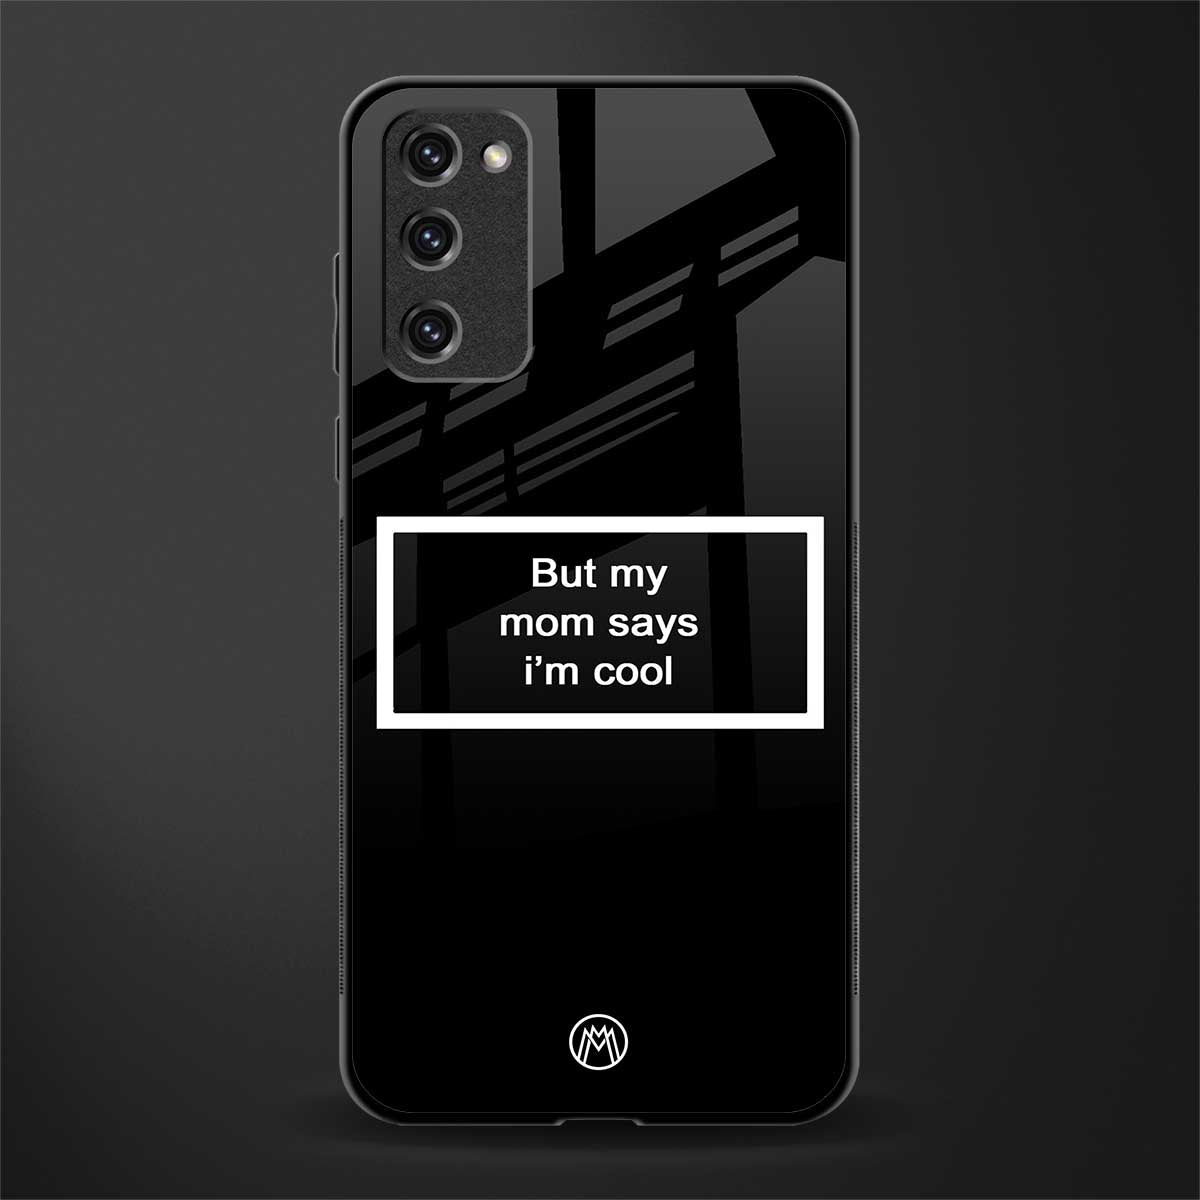 mom says i'm cool black glass case for samsung galaxy s20 fe image